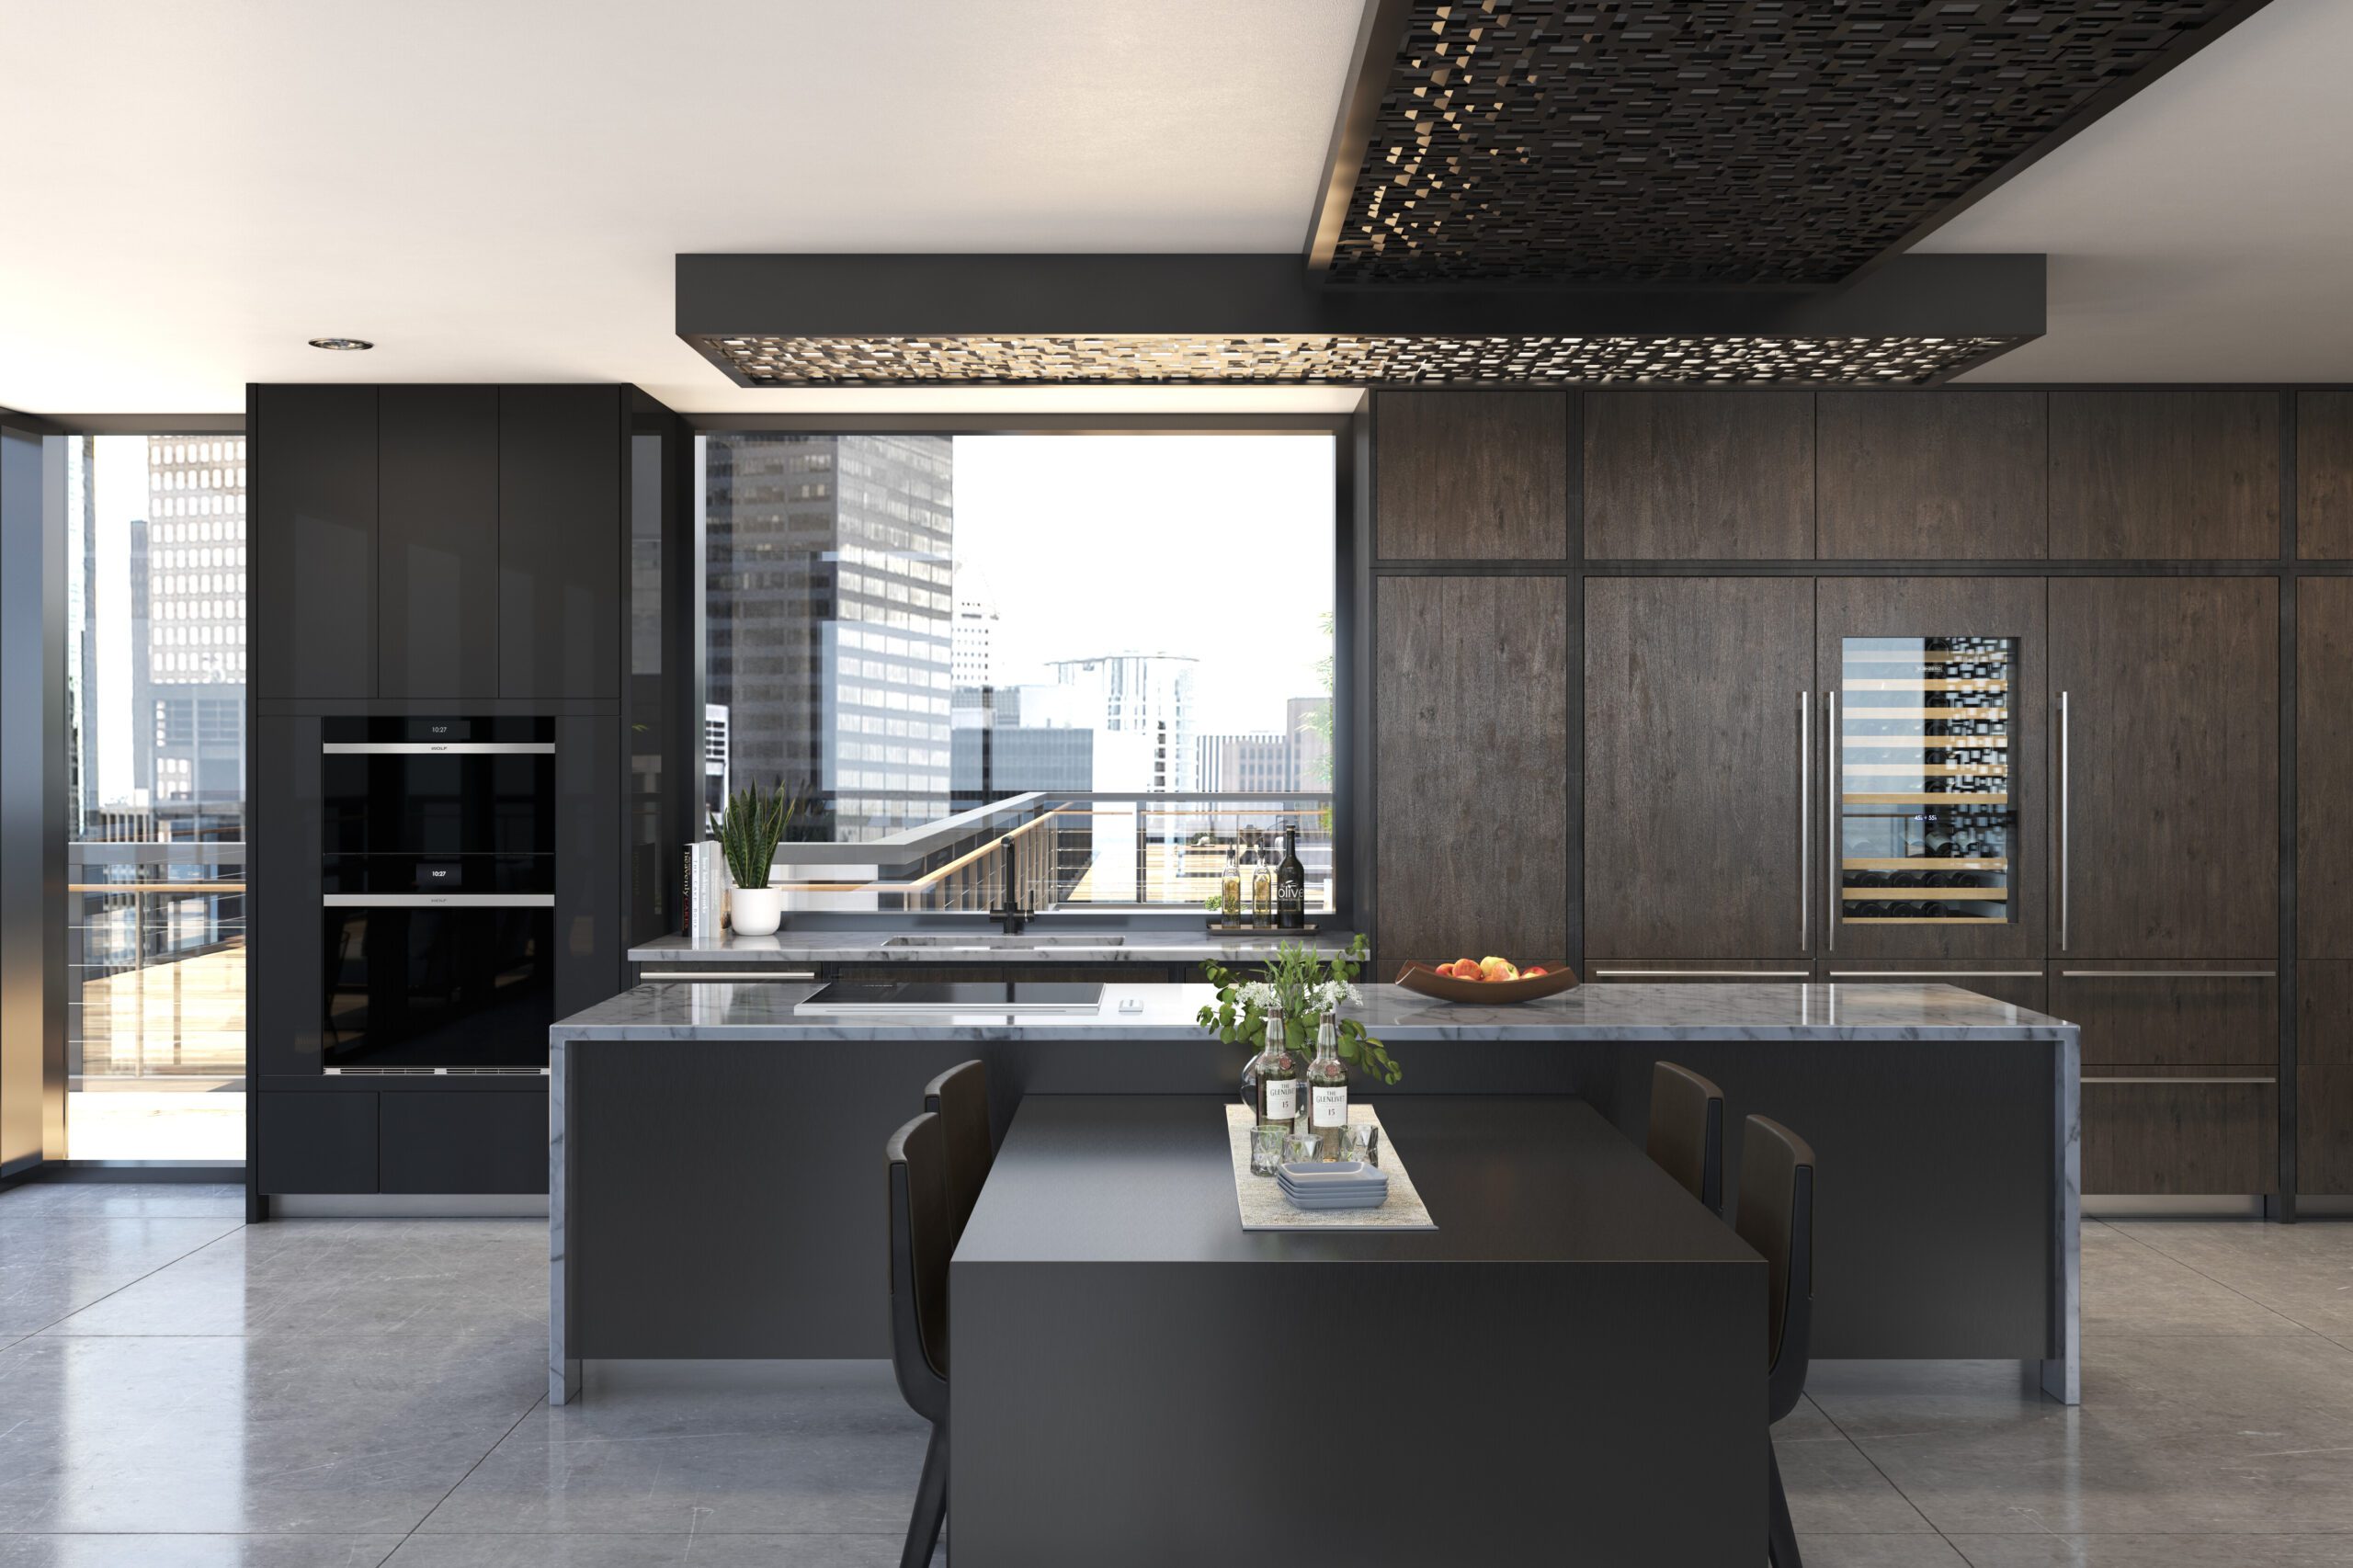 A contemporary kitchen with a monochromatic color scheme featuring modern appliances, a wine storage unit, and a cityscape view.